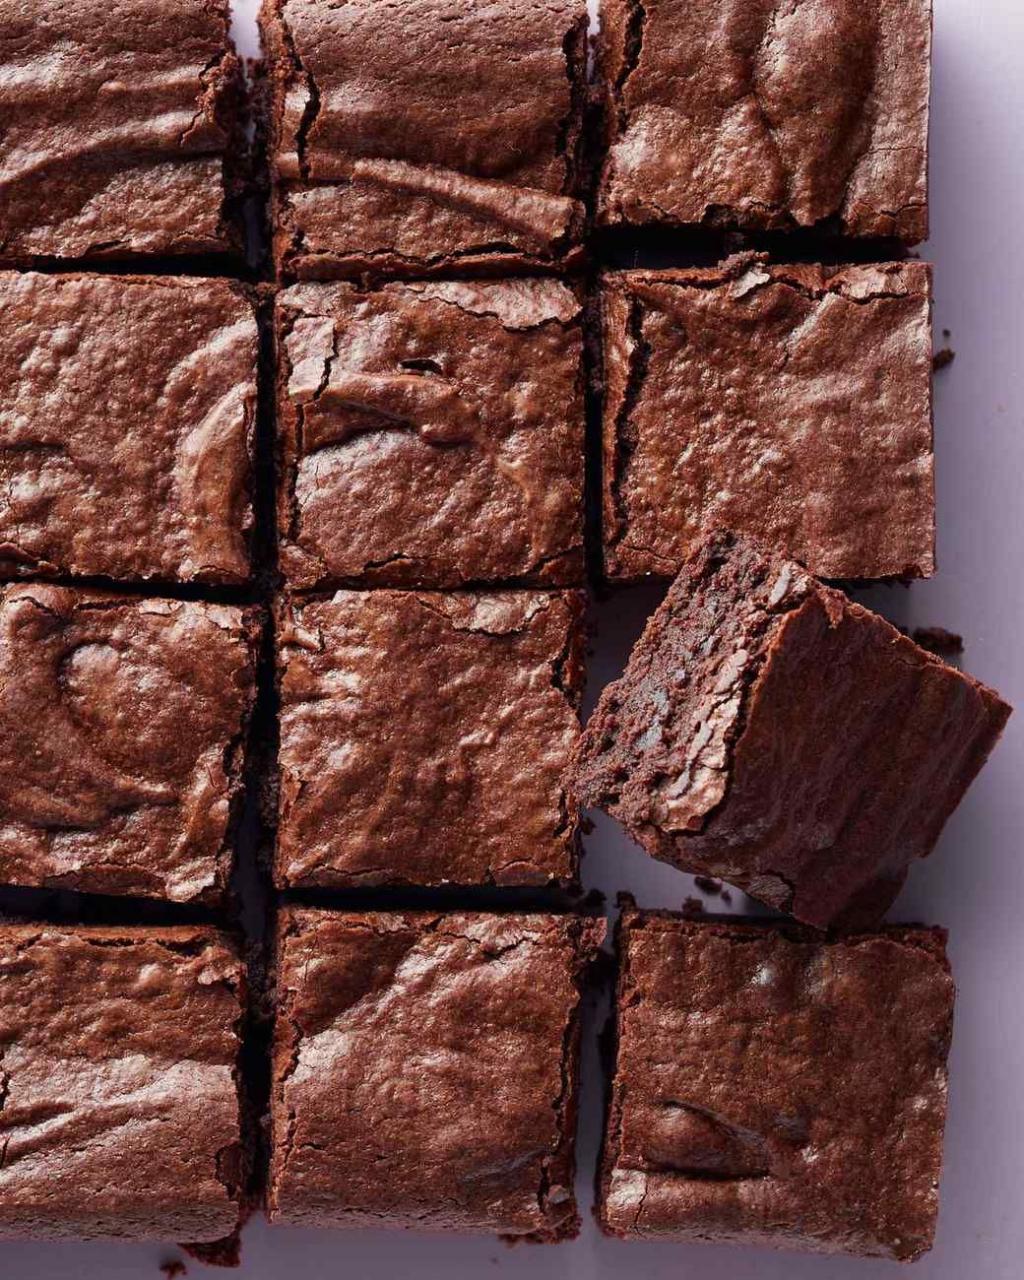 Easy Chewy Brownie Recipe Without Cocoa Powder